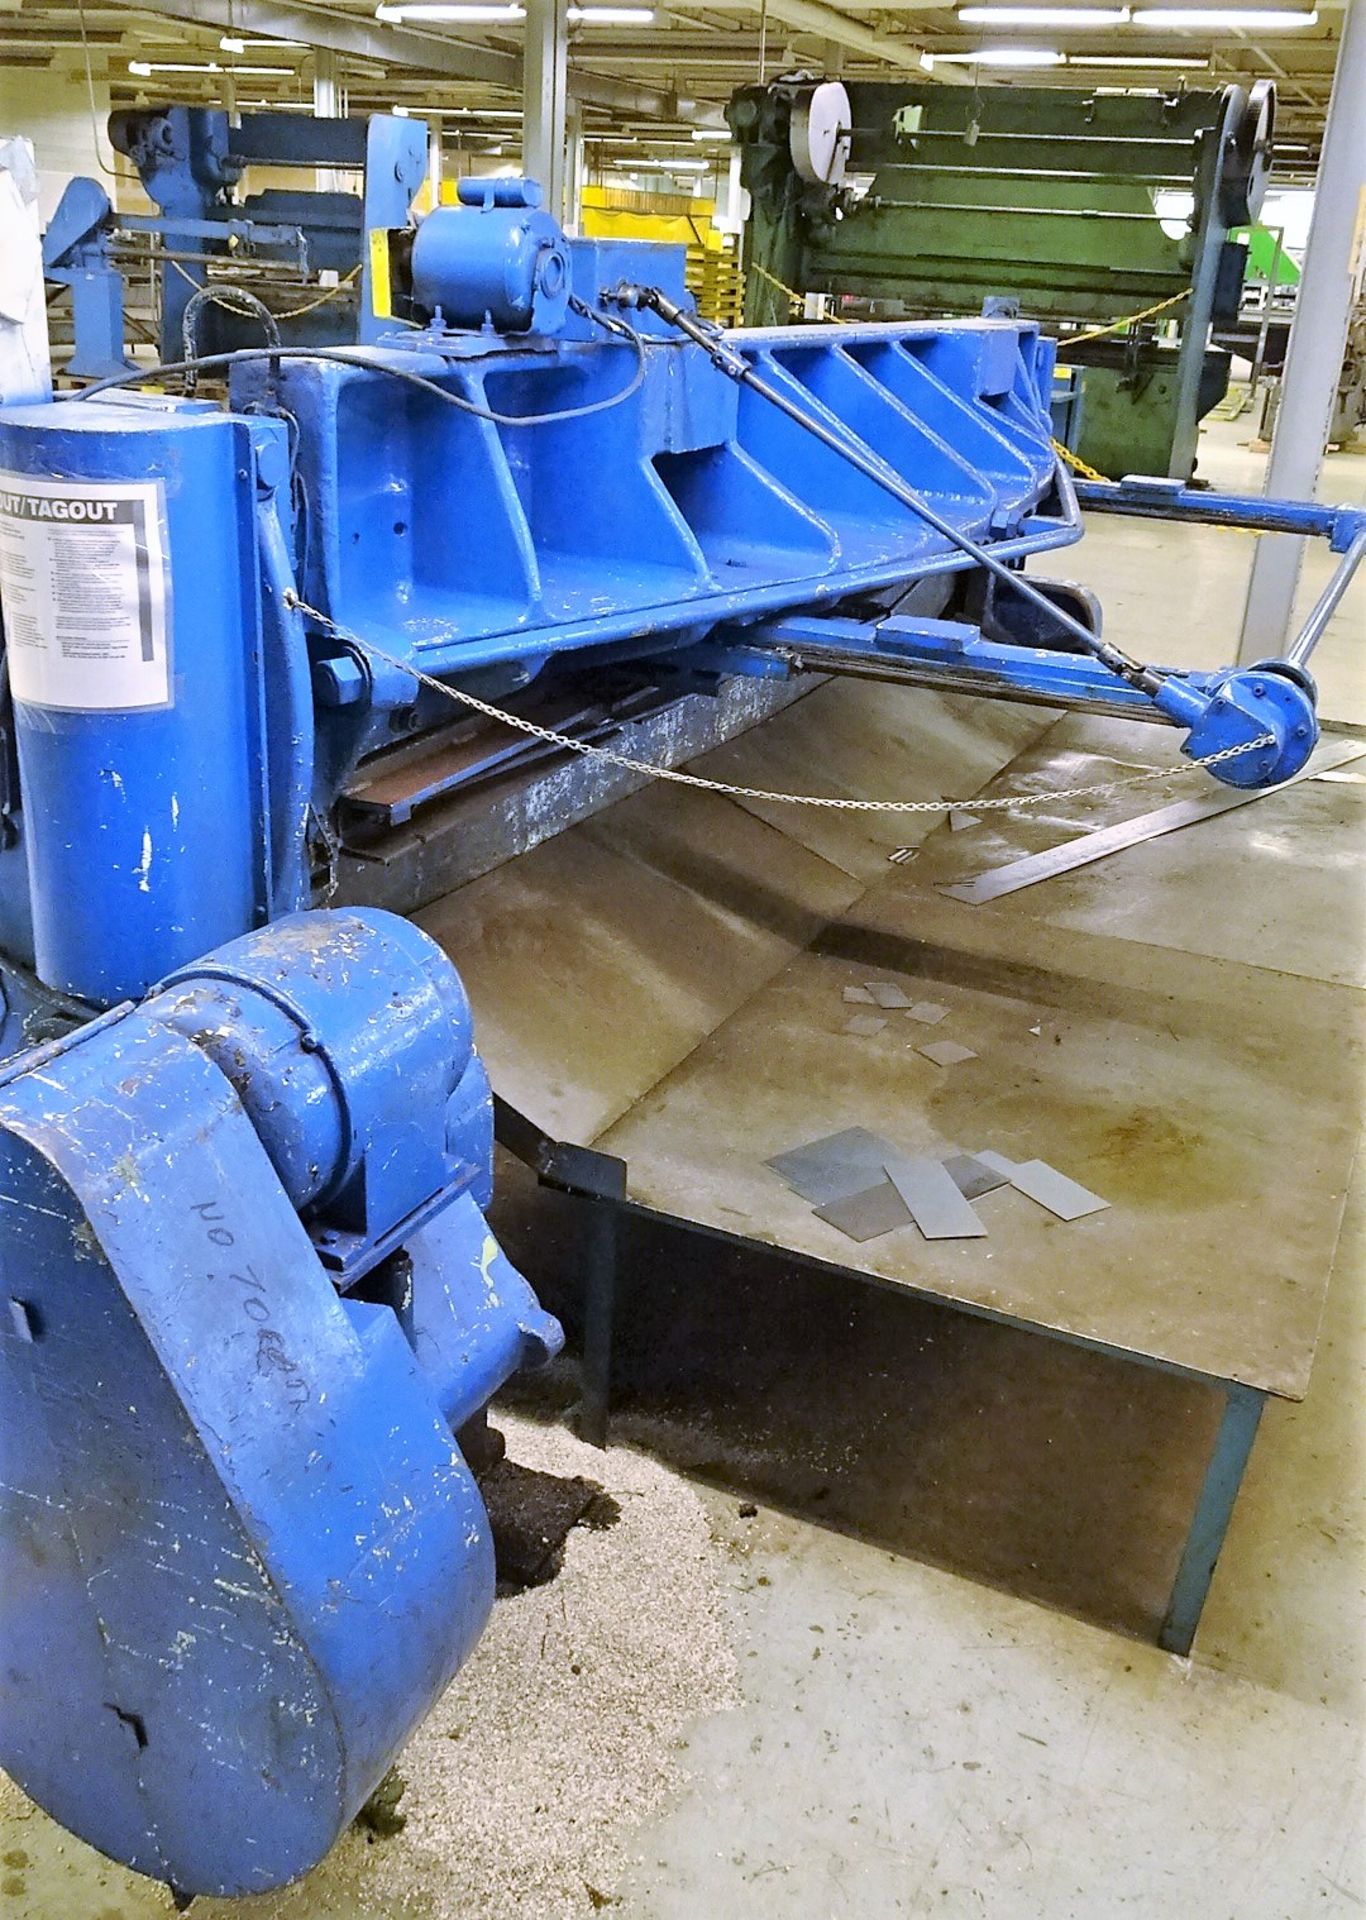 WYSONG 10' MECHANICAL SHEAR, APPROXIMATELY 10 GAUGE CAPACITY, SQUARING ARM, FRONT POWERED POWER BACK - Image 3 of 3